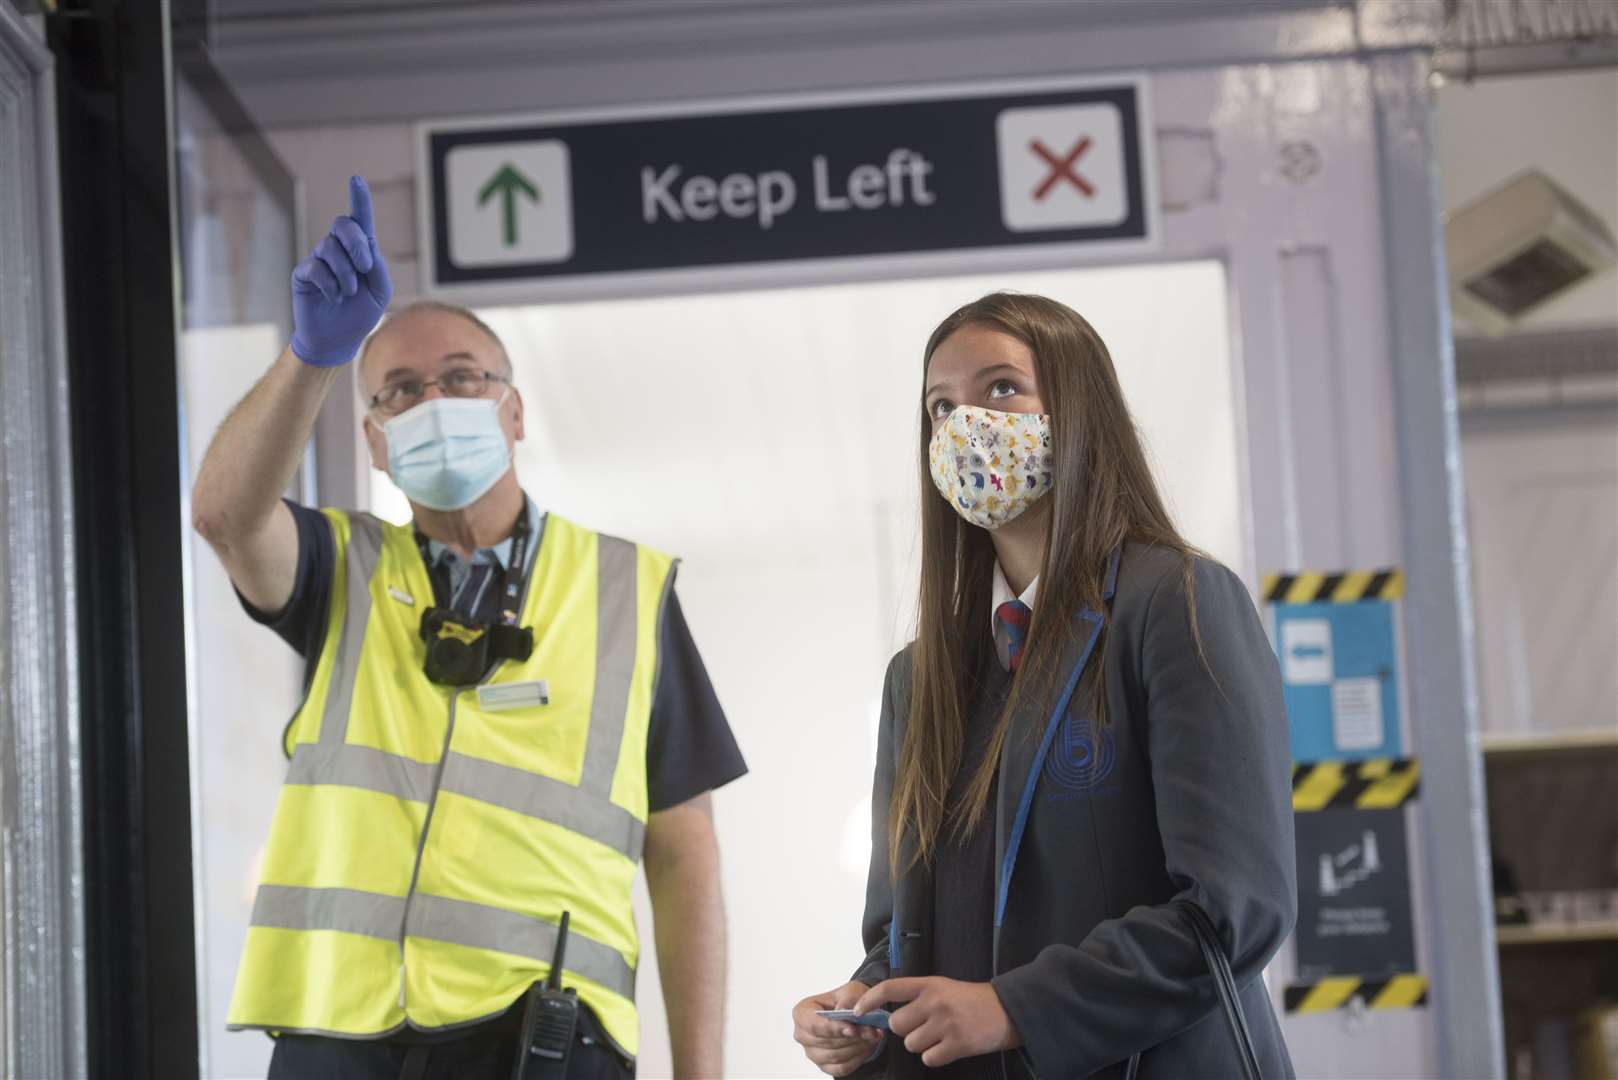 Southeastern had to introduce safety measures across their network to protect passengers from potential spread of coronavirus